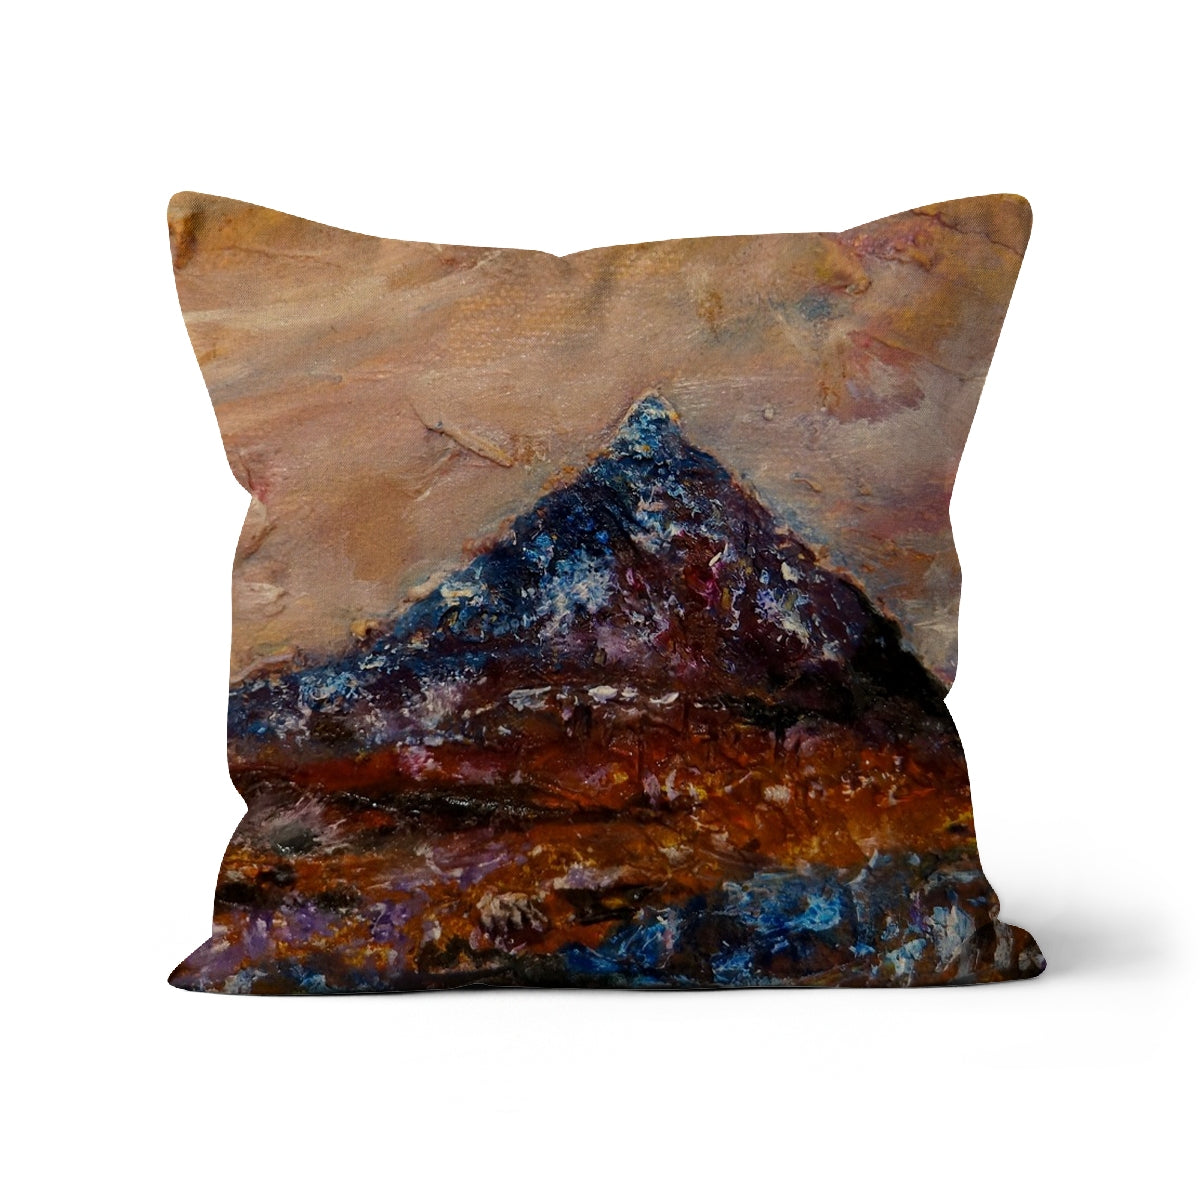 Buachaille Etive Mòr Art Gifts Cushion-Cushions-Glencoe Art Gallery-Faux Suede-12"x12"-Paintings, Prints, Homeware, Art Gifts From Scotland By Scottish Artist Kevin Hunter